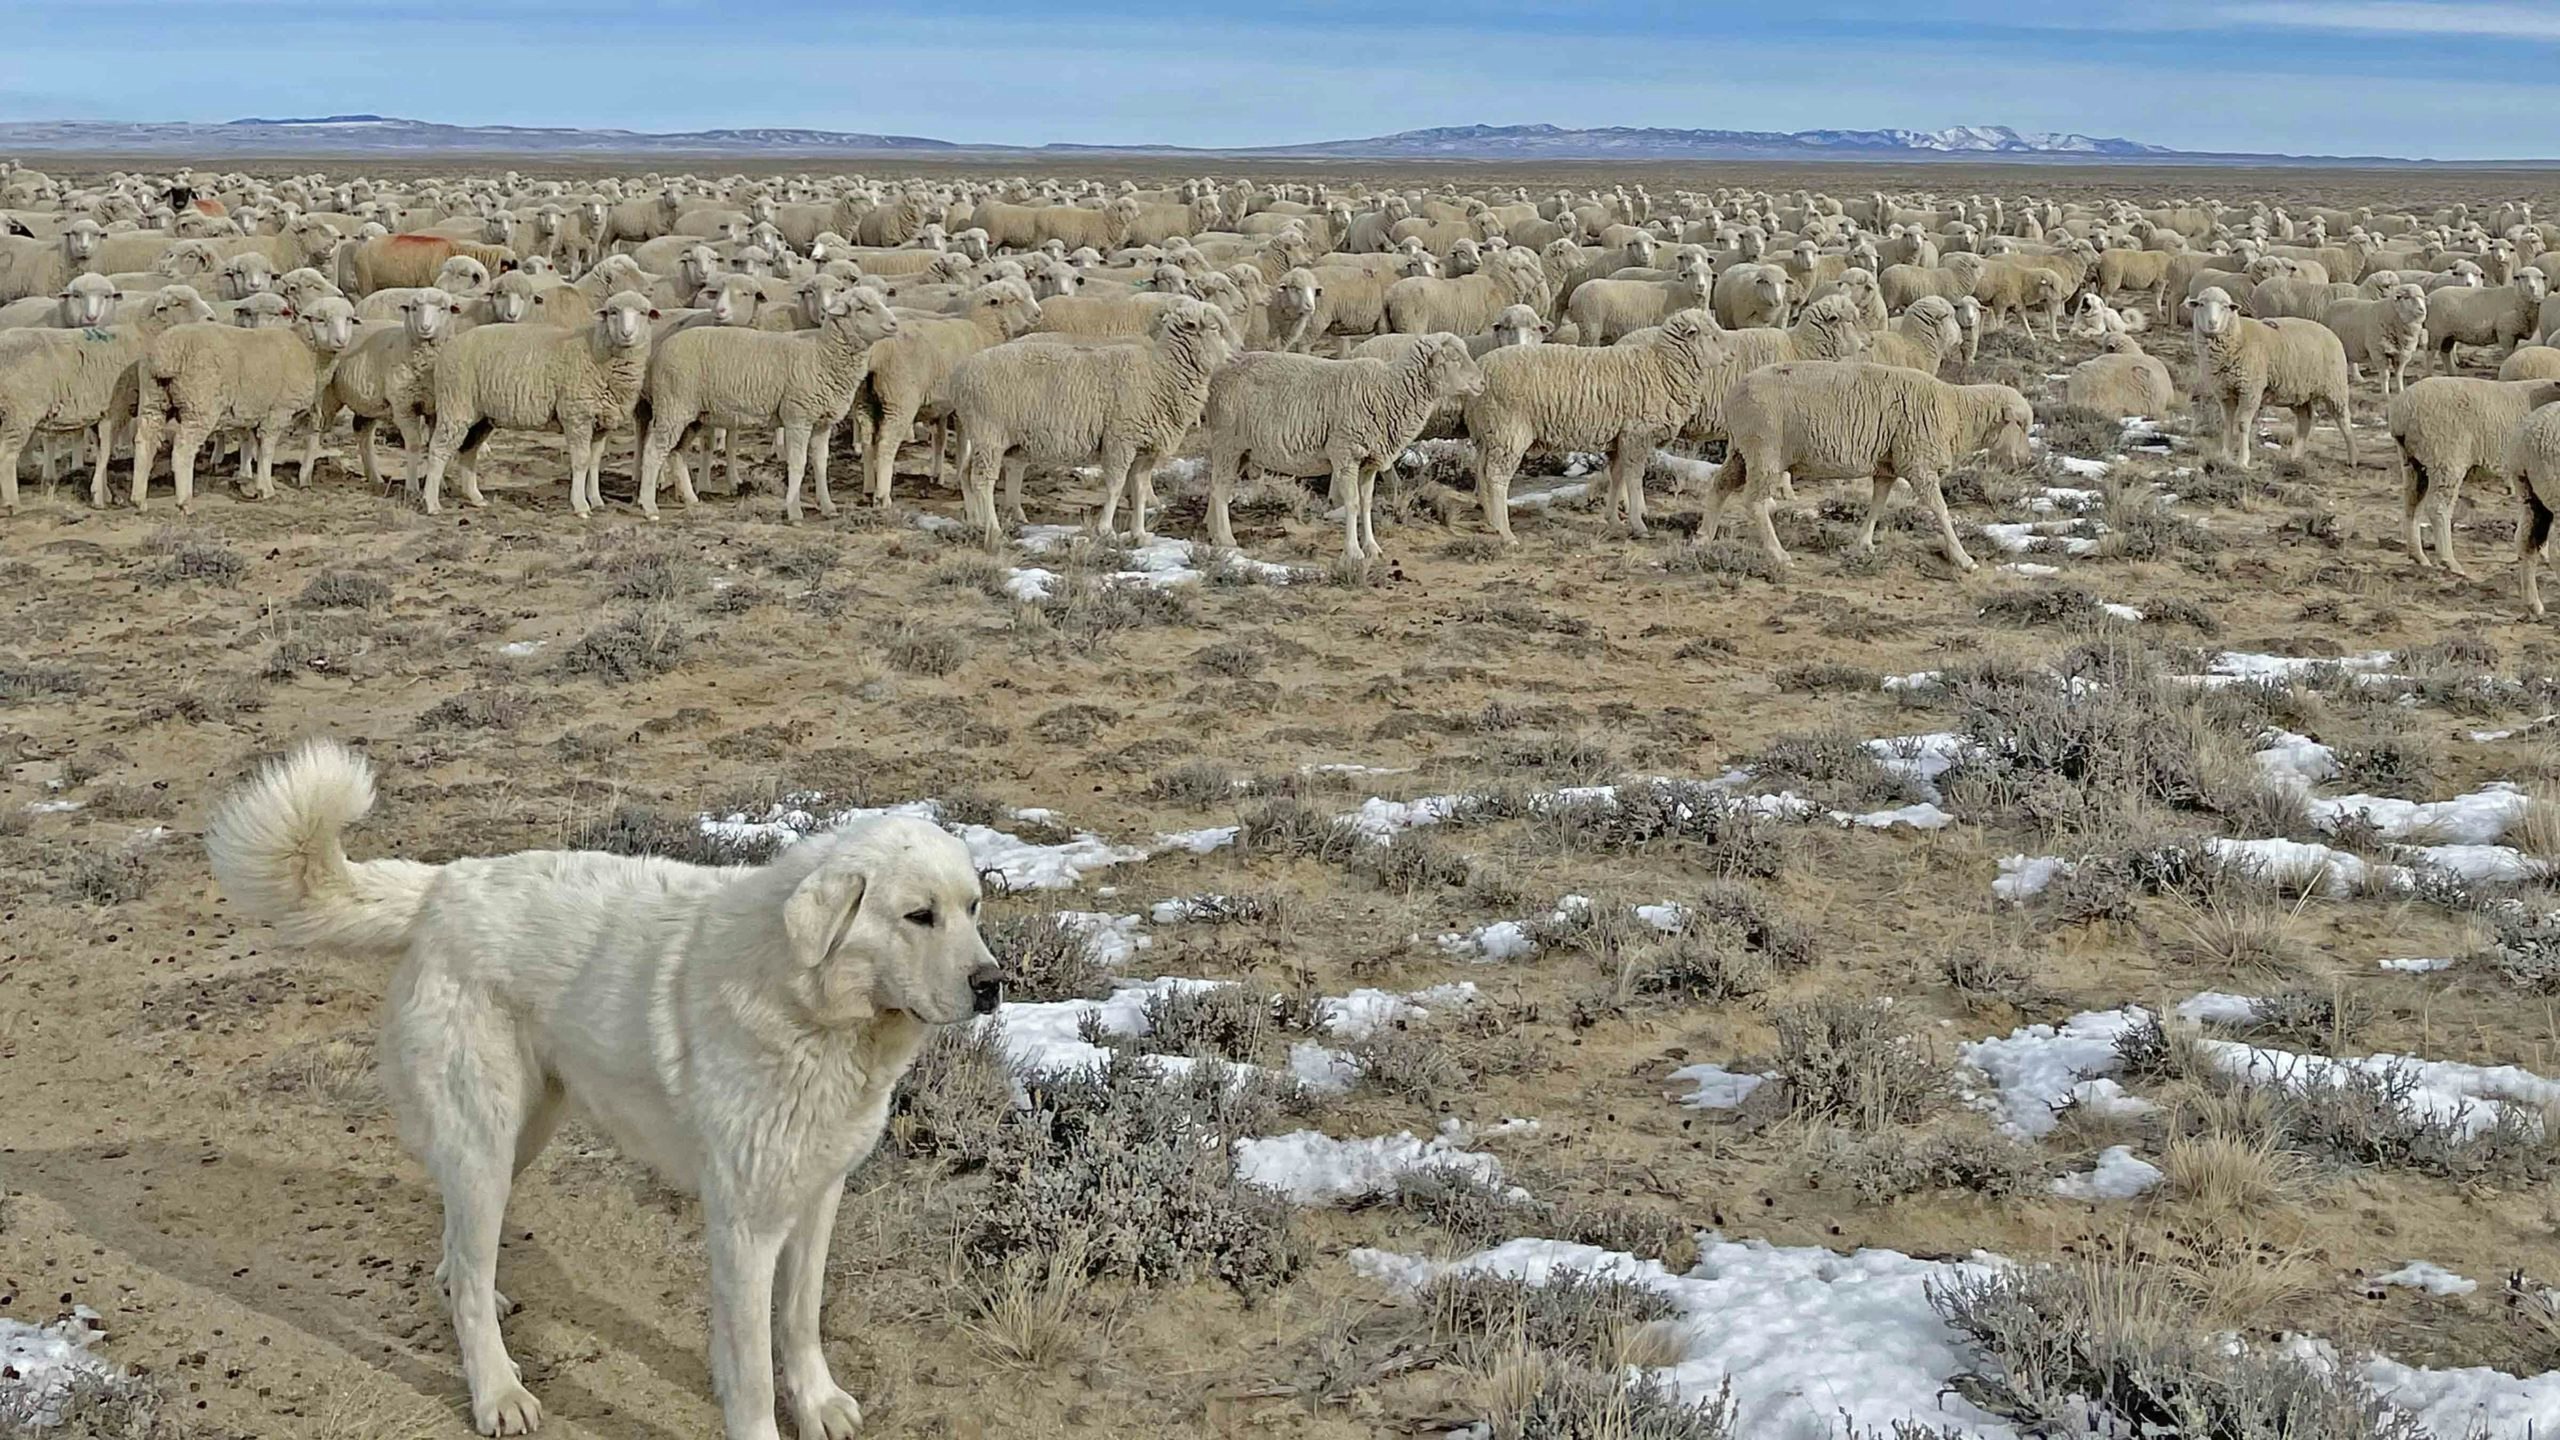 Guard dog with ewes on Cyclone Rim scaled